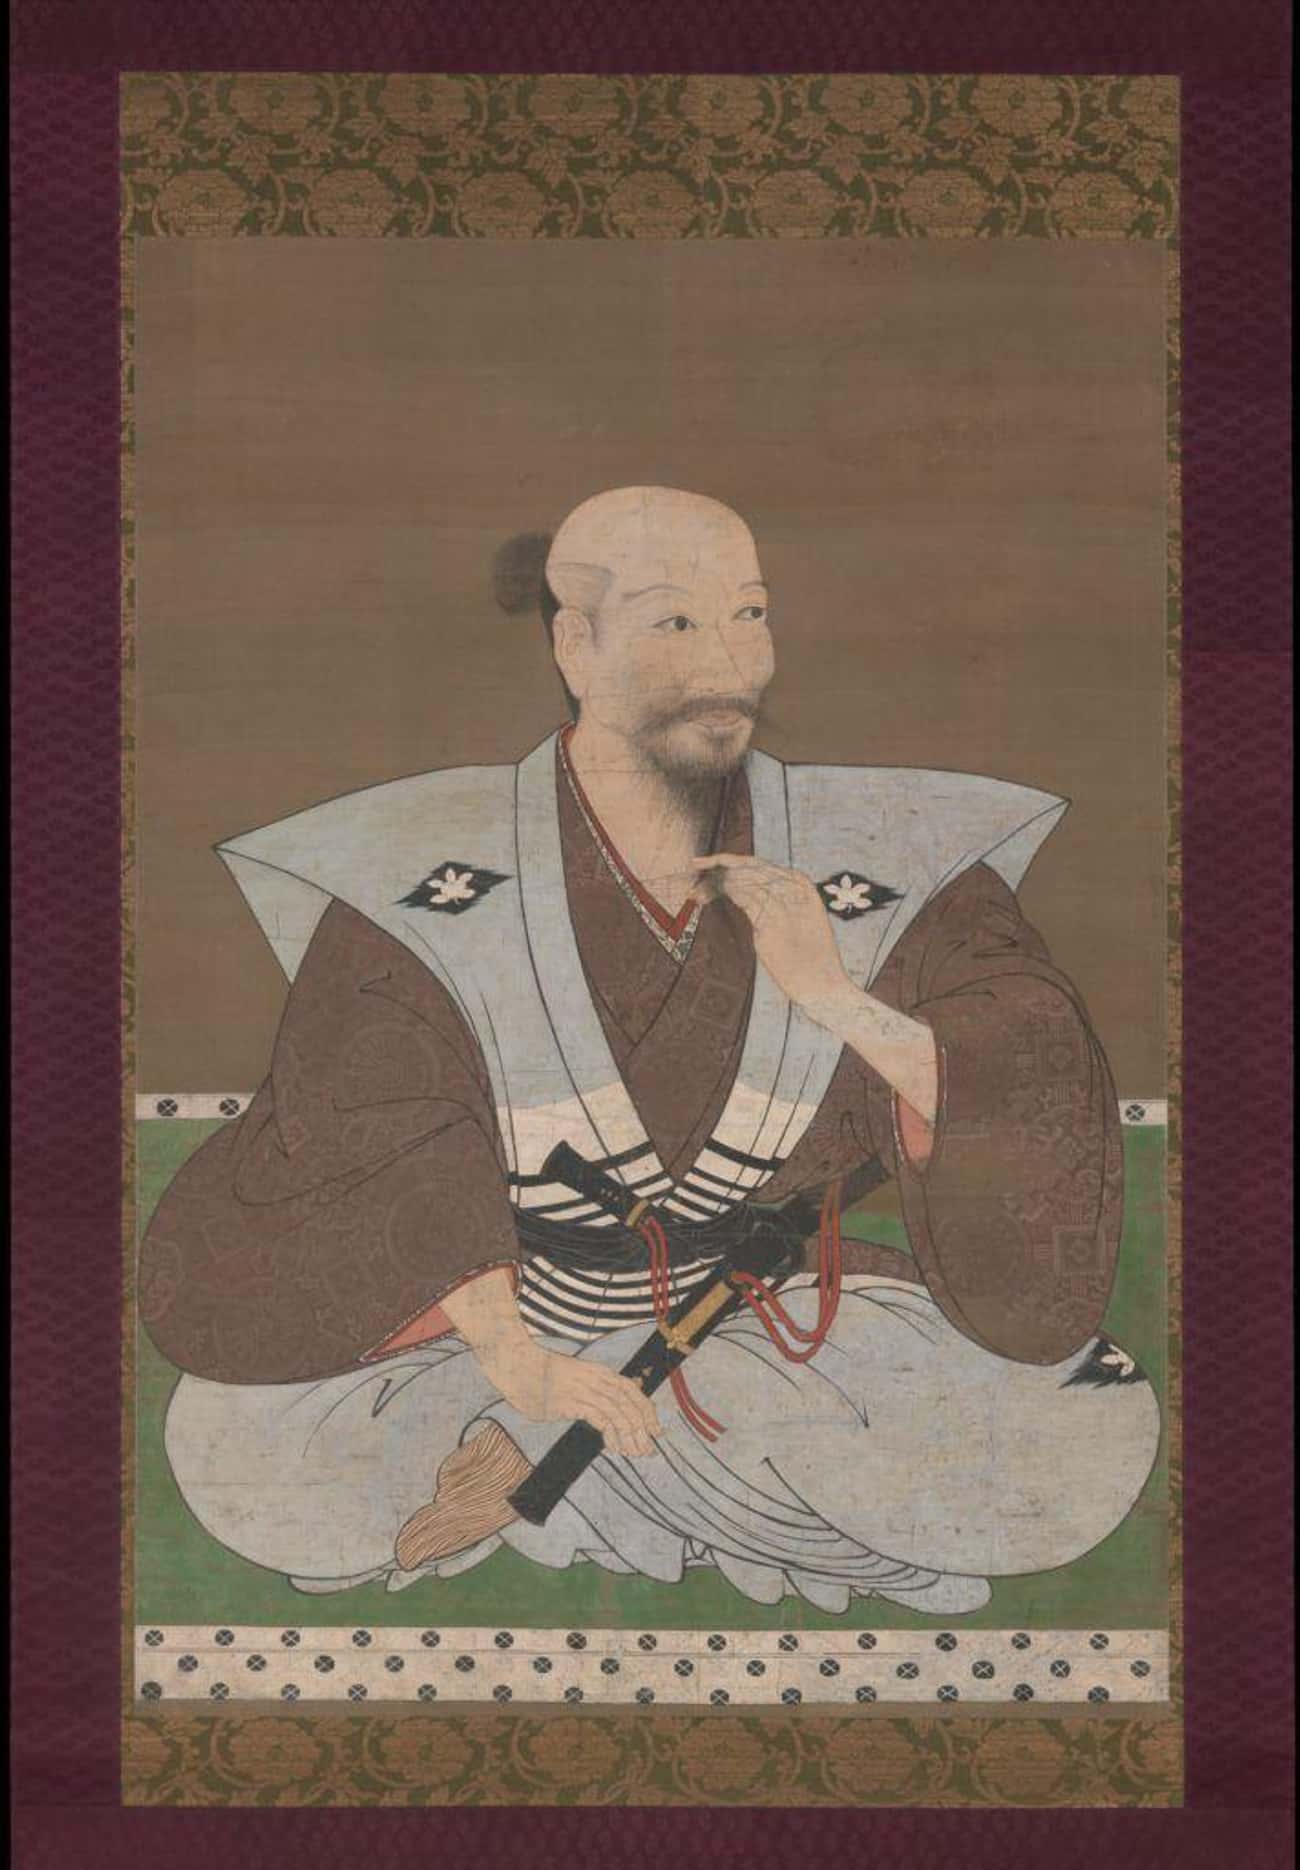 Samurai Maintained Loyalty To Feudal Lords And The Shogun